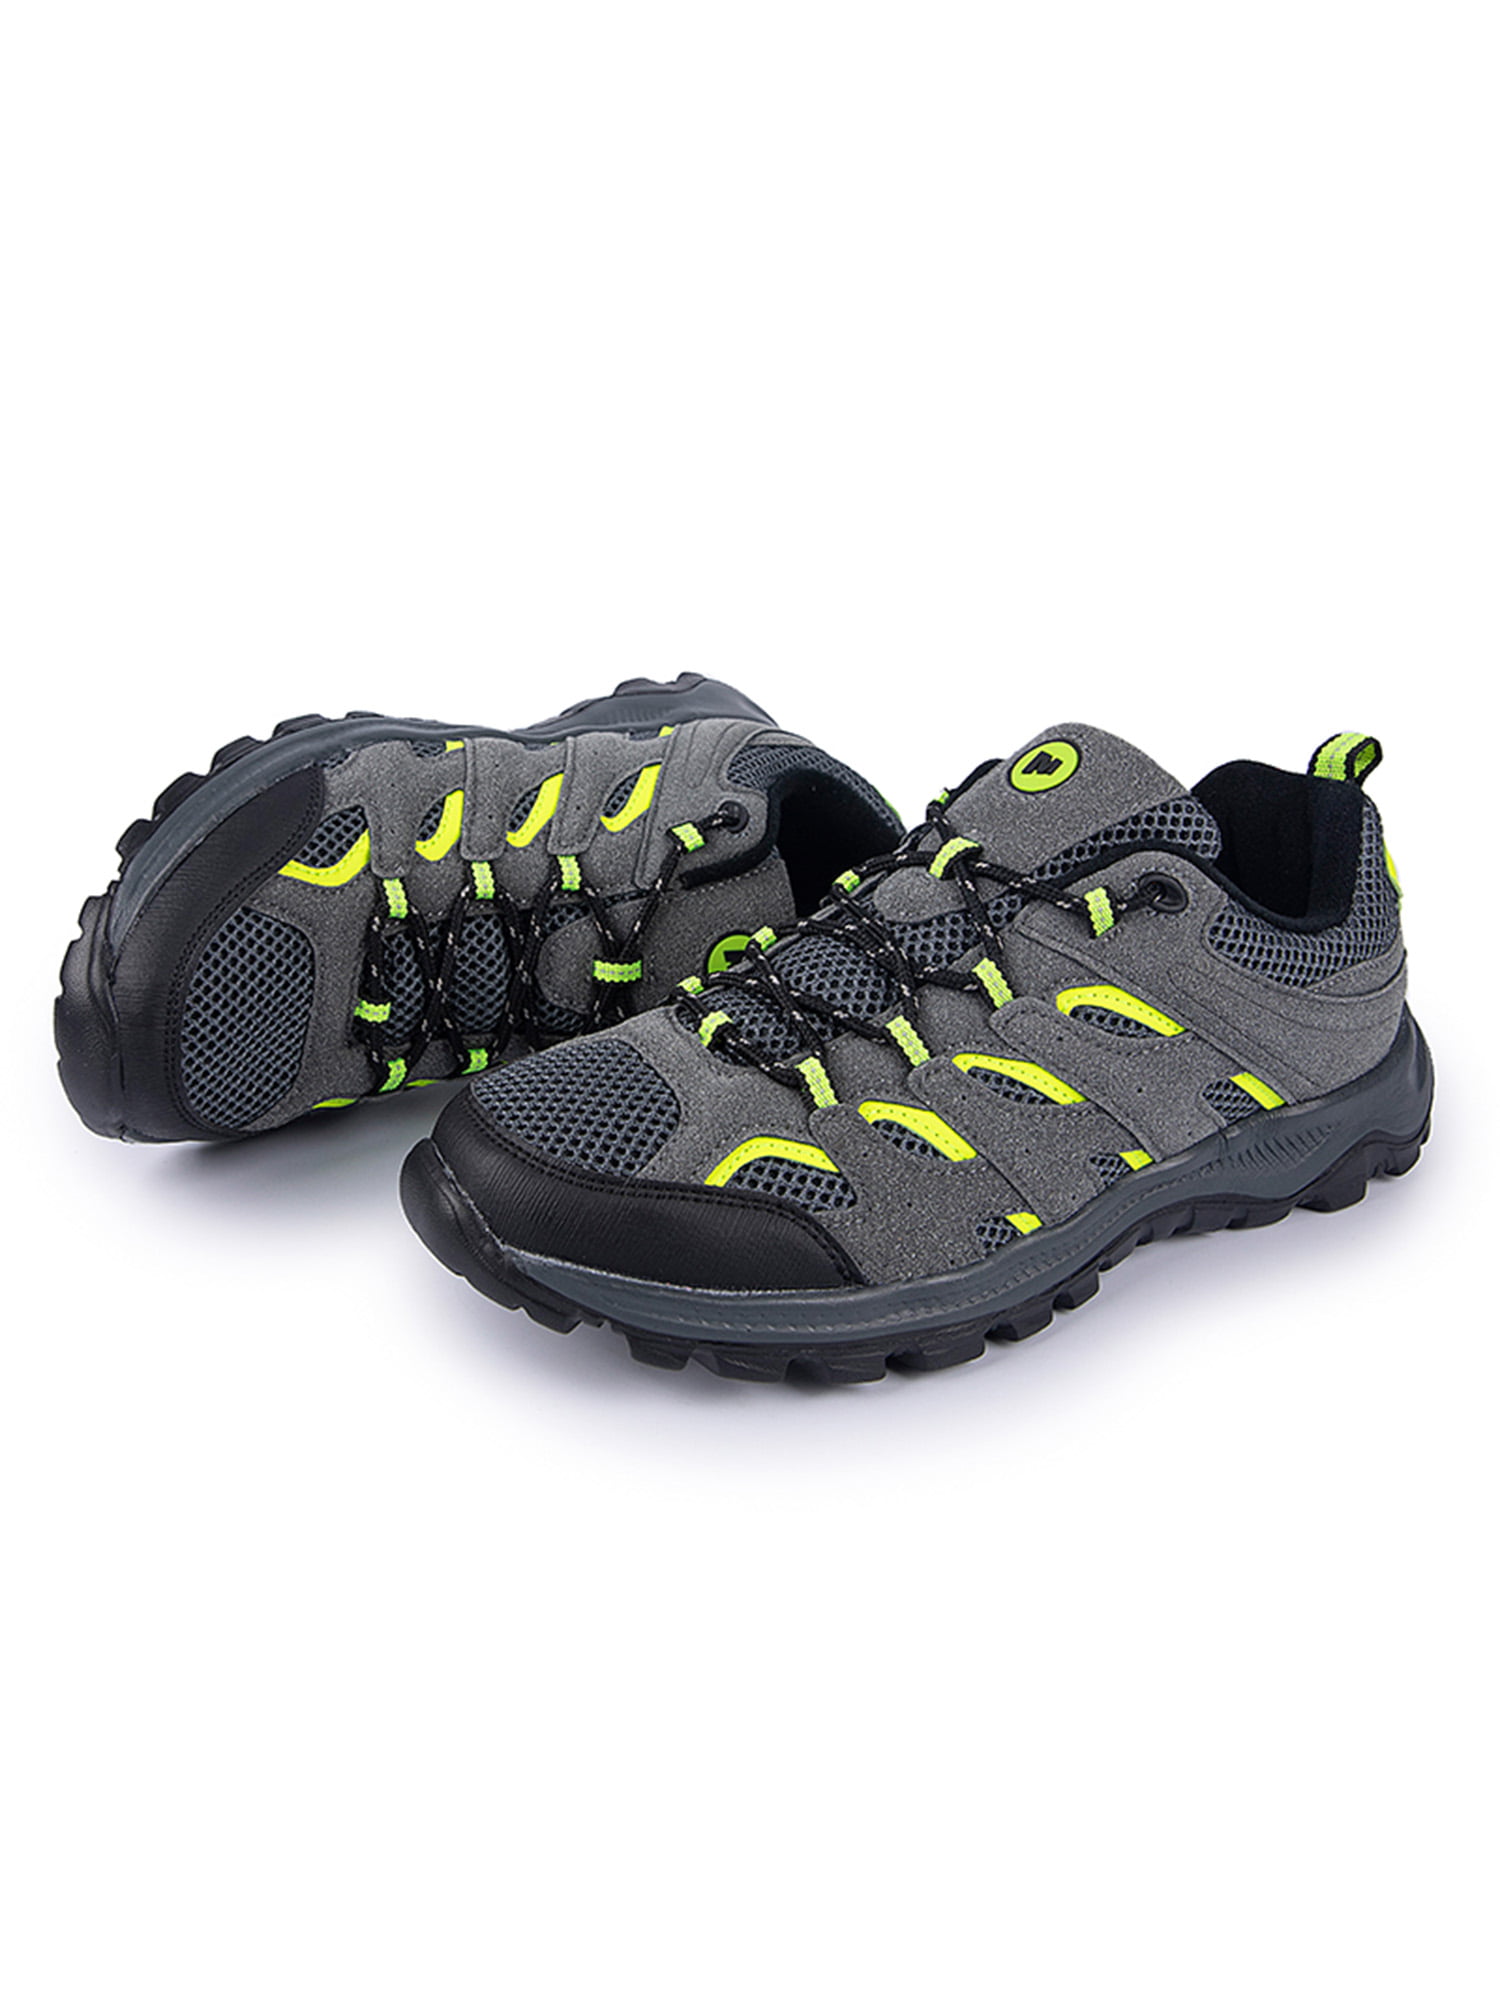 Details about   UK Safety Work Boots Trainers For Mens Shoes Composite Toe Outdoor Sneakers Mesh 